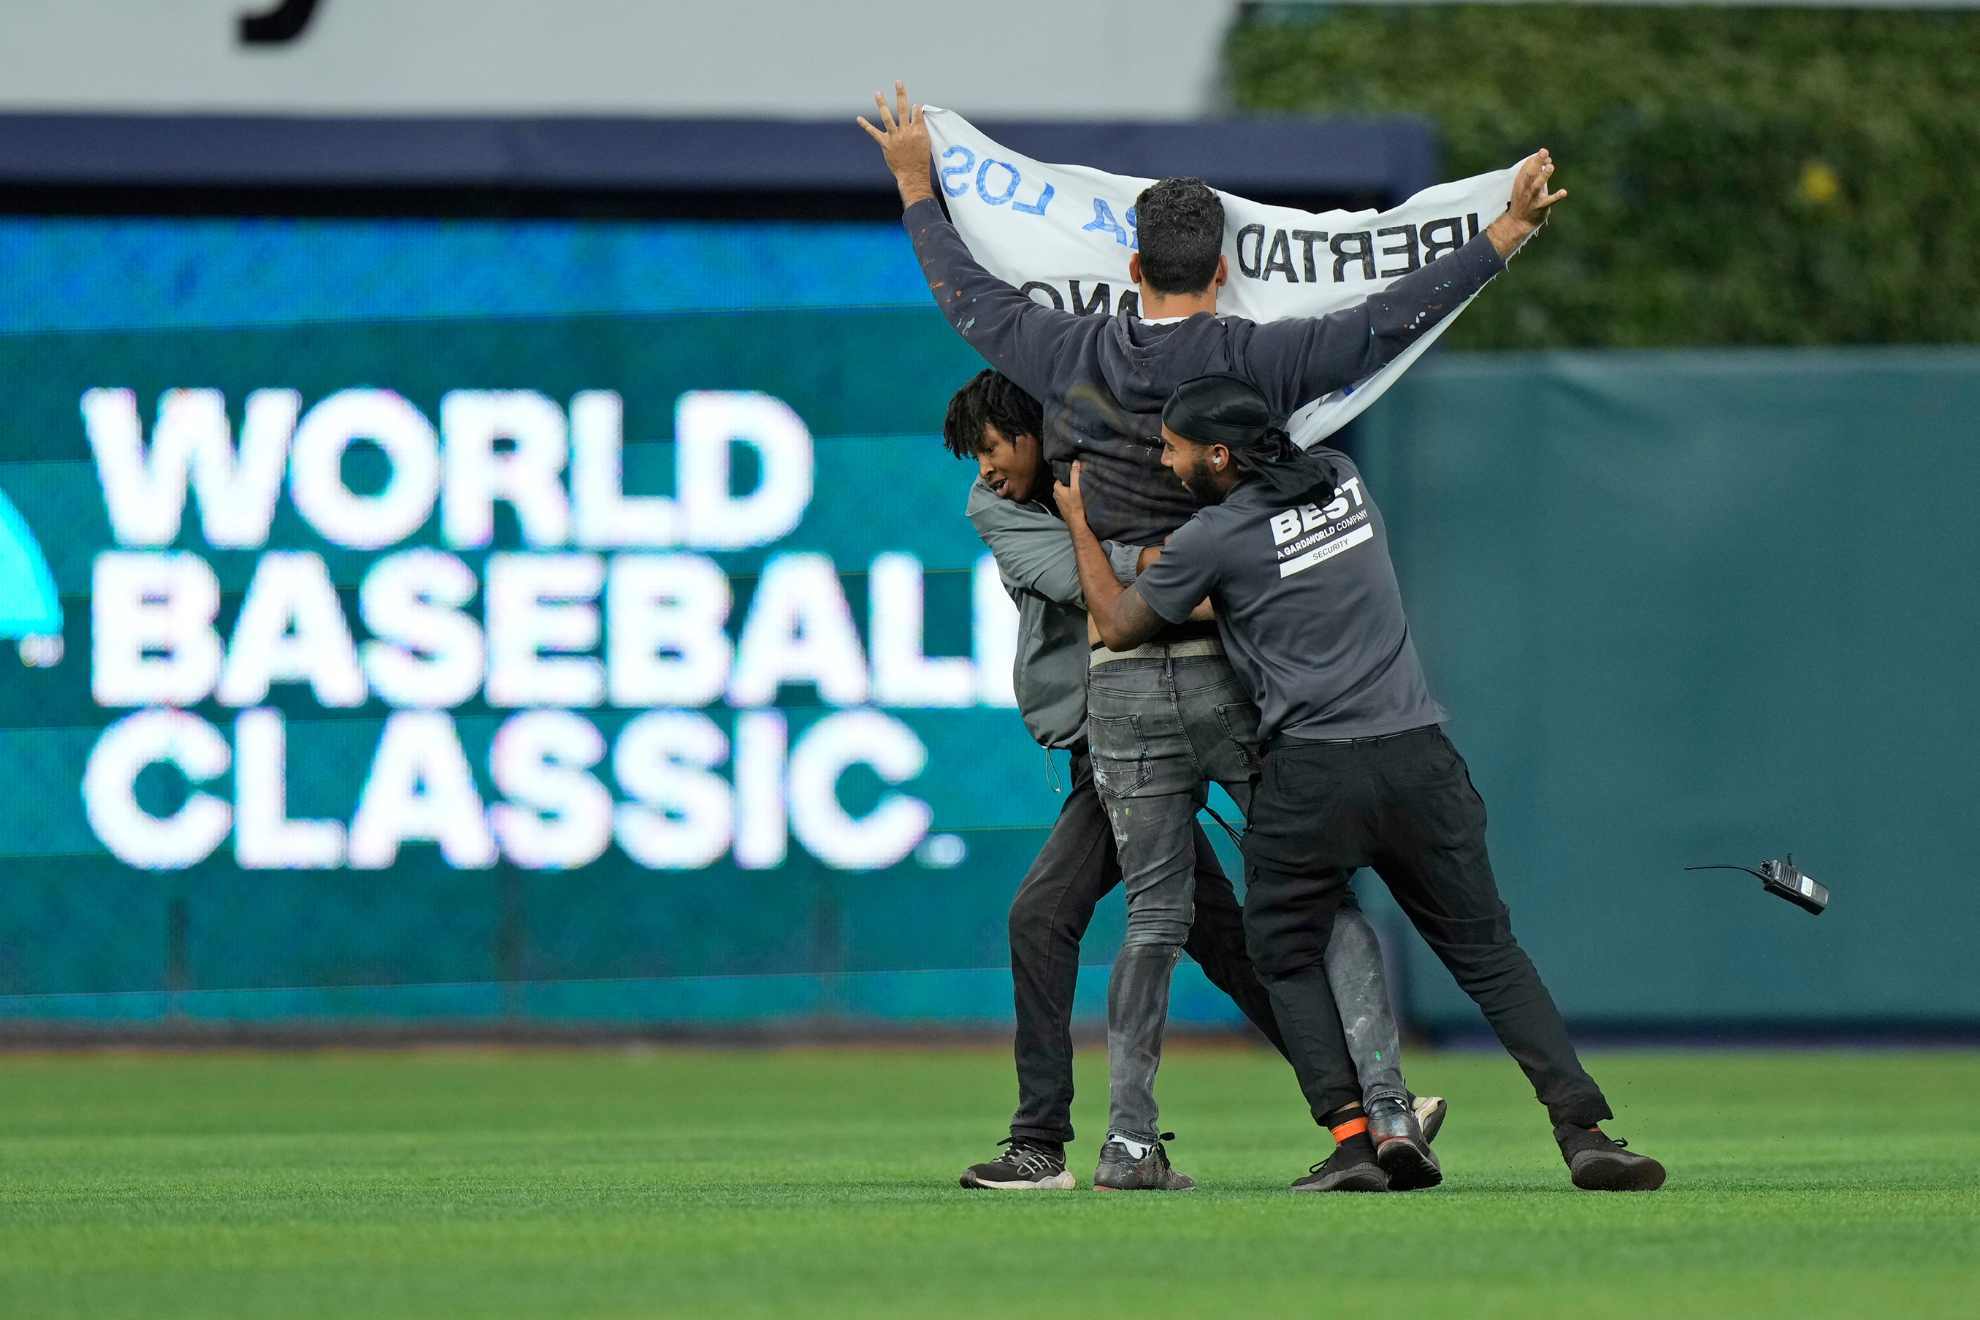 Security guards take out a demonstrator that ran onto the field during the sixth inning of a World Baseball Classic game between Cuba and the U.S.